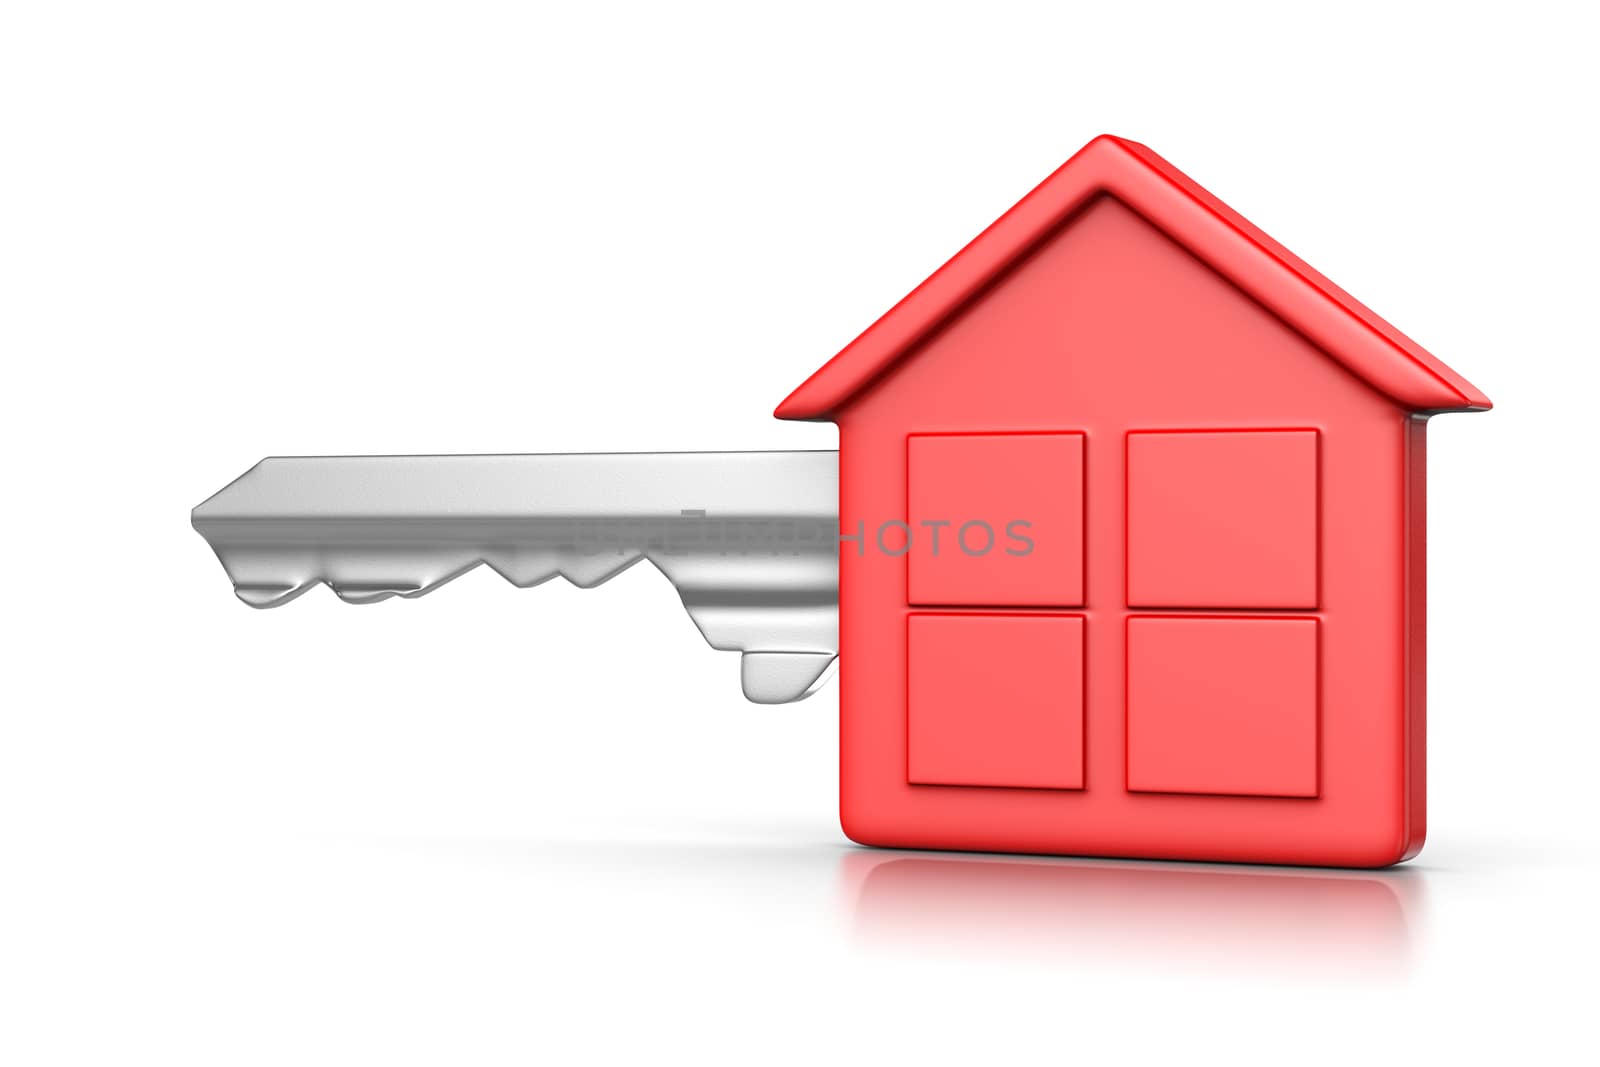 One Single Metal Key with Red Plastic Head in the Shape of an House on White Background 3D Illustration